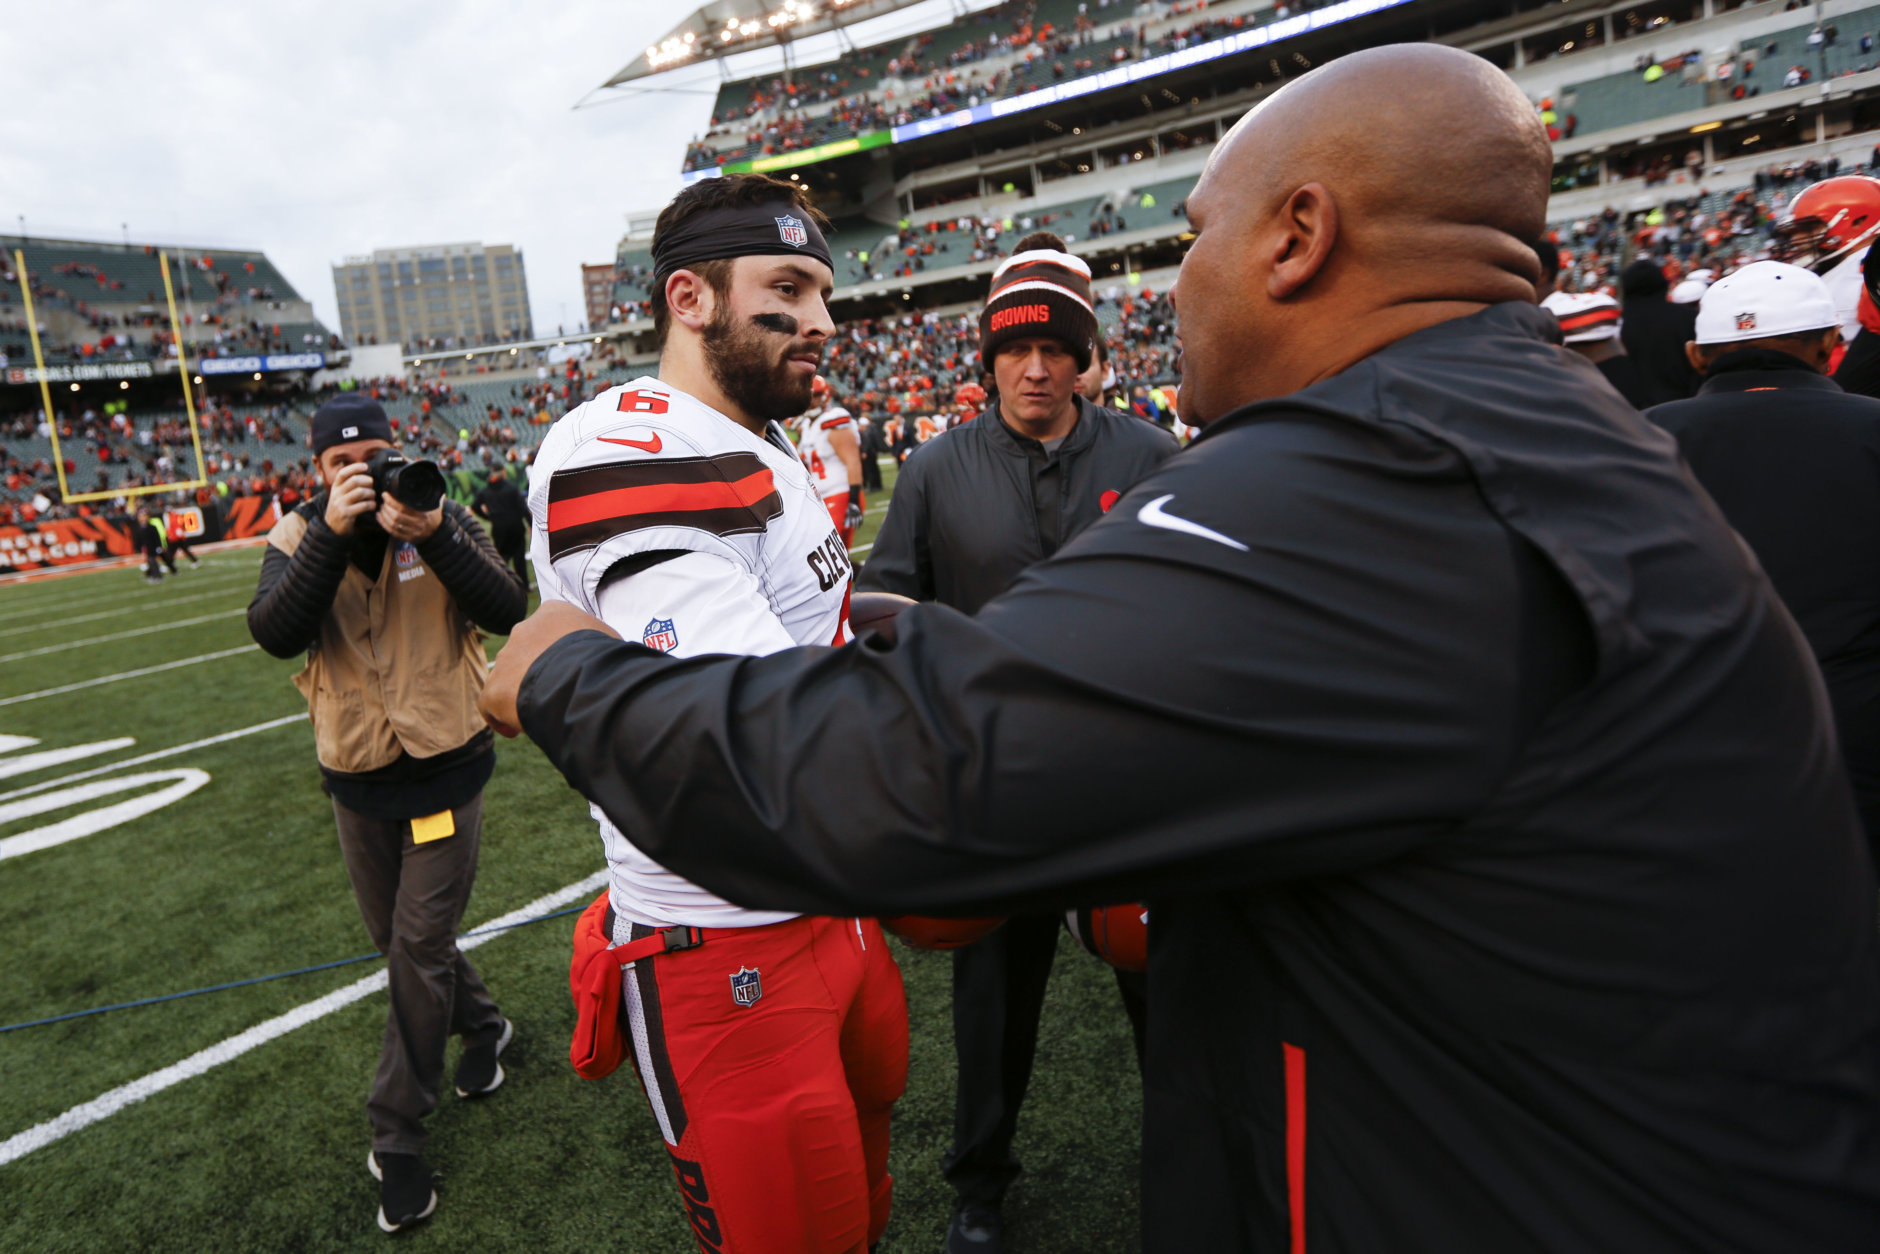 Cleveland Browns quarterback Baker Mayfield (6) meets with Cincinnati Bengals special assistant Hue Jackson, right, after an NFL football game, Sunday, Nov. 25, 2018, in Cincinnati. (AP Photo/Frank Victores)